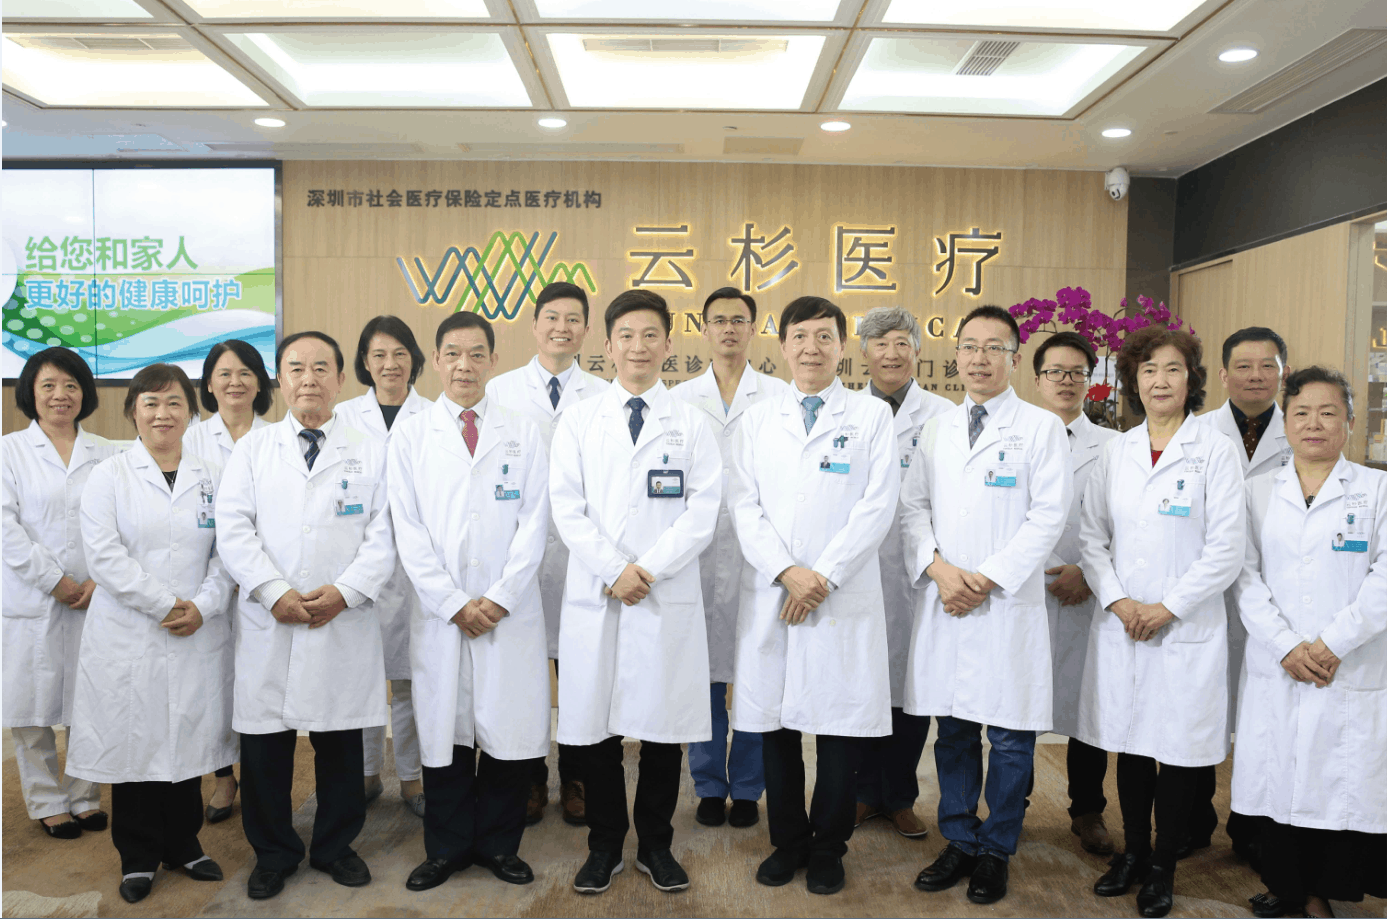 Featured image for “Shenzhen Yunshan Medical Center”